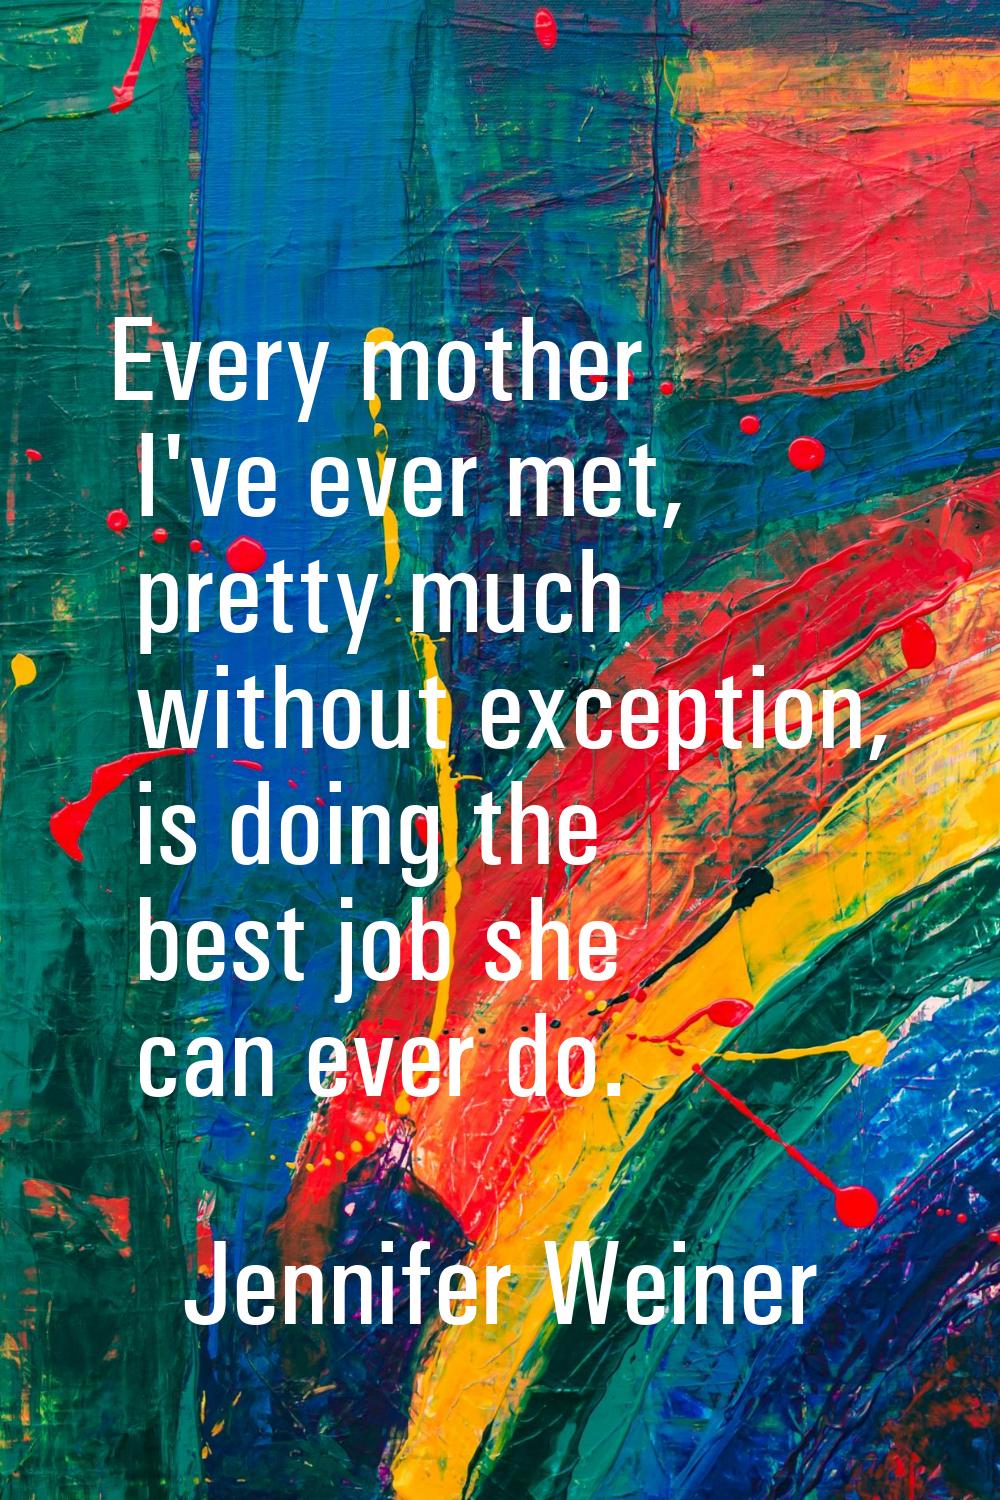 Every mother I've ever met, pretty much without exception, is doing the best job she can ever do.